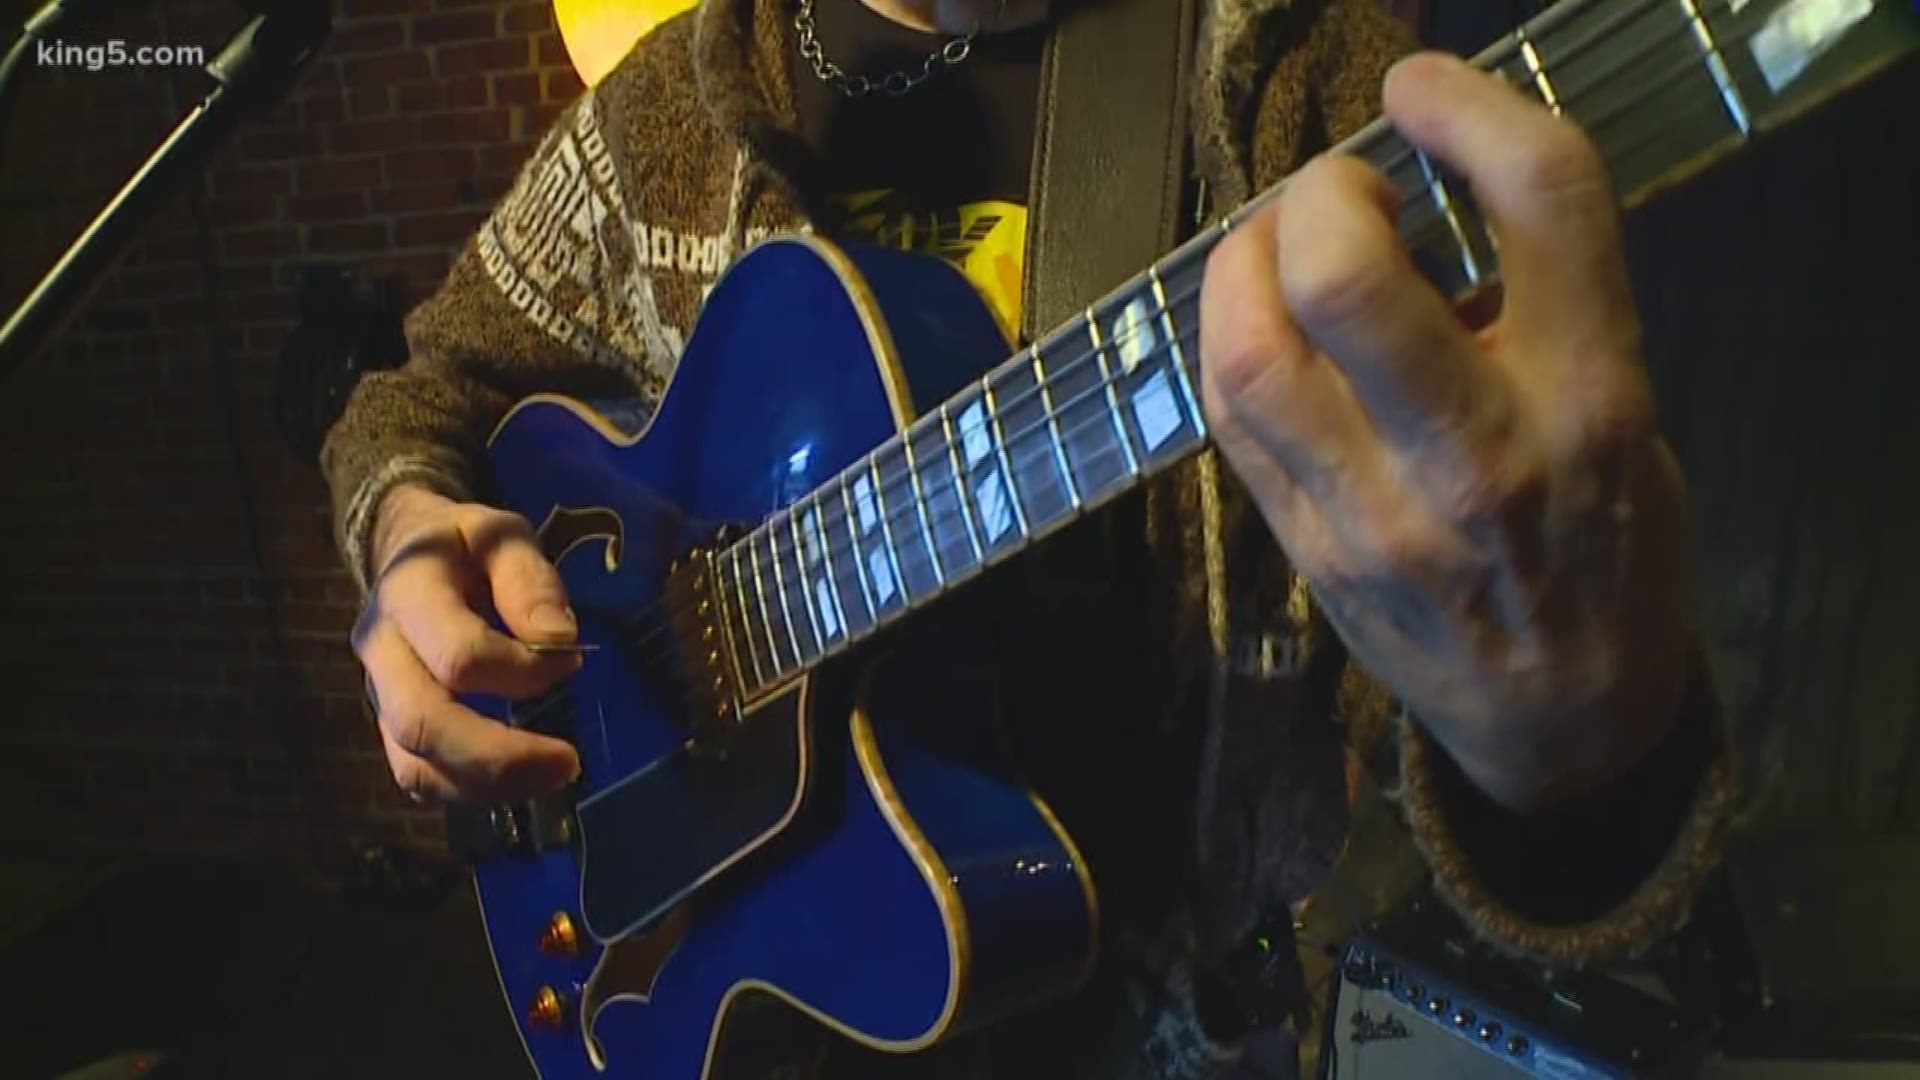 Many of the working musicians in western Washington don't have health insurance, and aren't able to see a doctor. A new program expands healthcare options for these performers who have specific needs. KING 5's Ted Land reports.